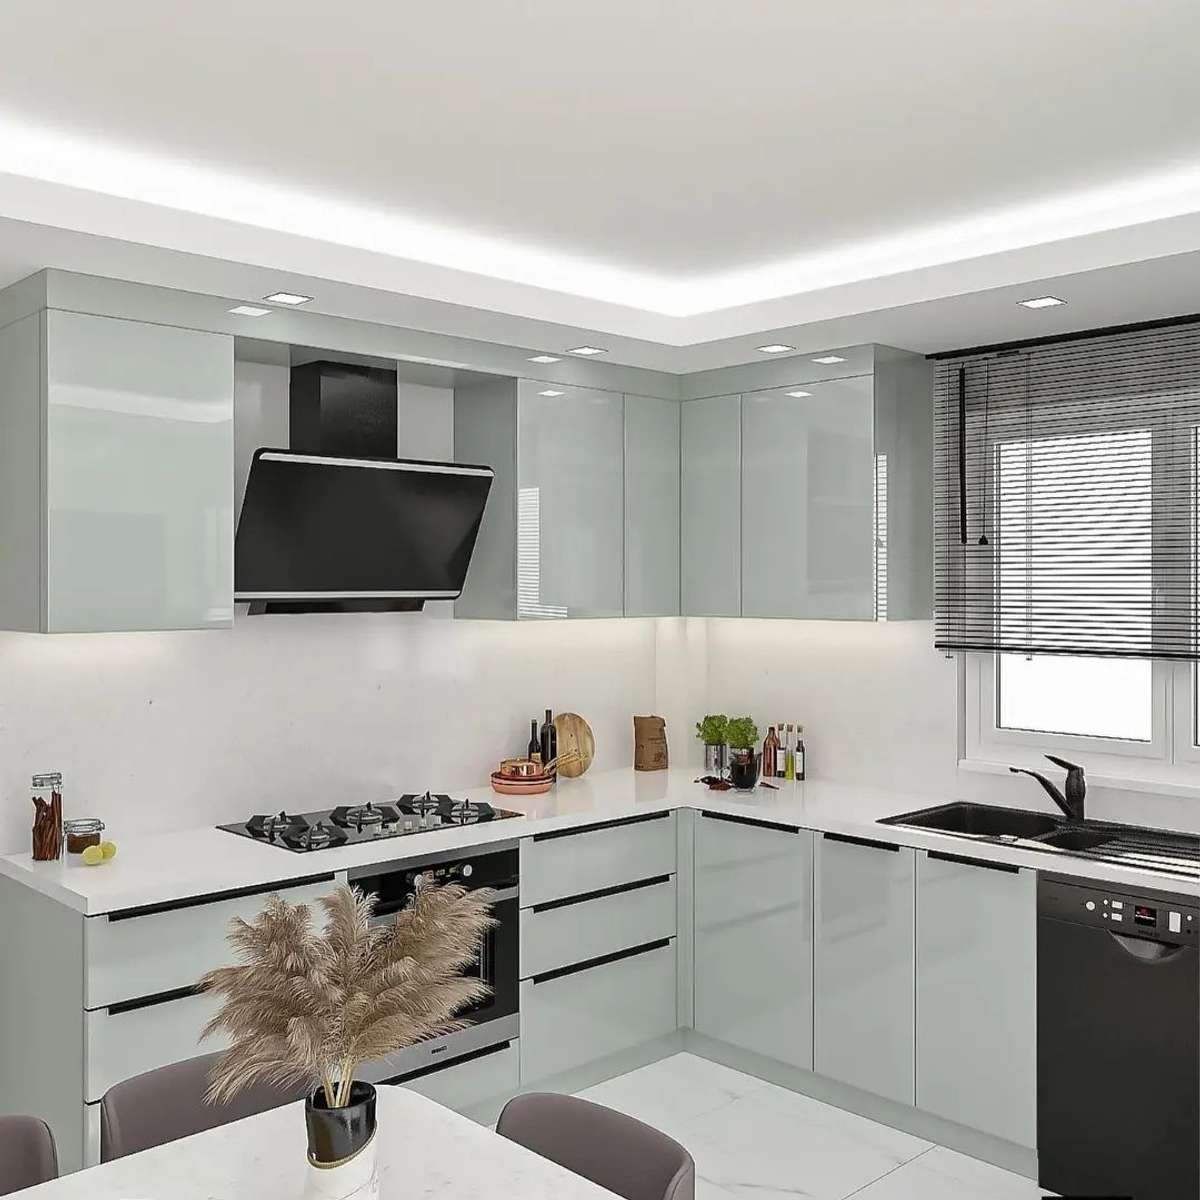 #ModularKitchen with full acrylic high gloss penals  100% customer satisfaction 
with branded quality
 hardware